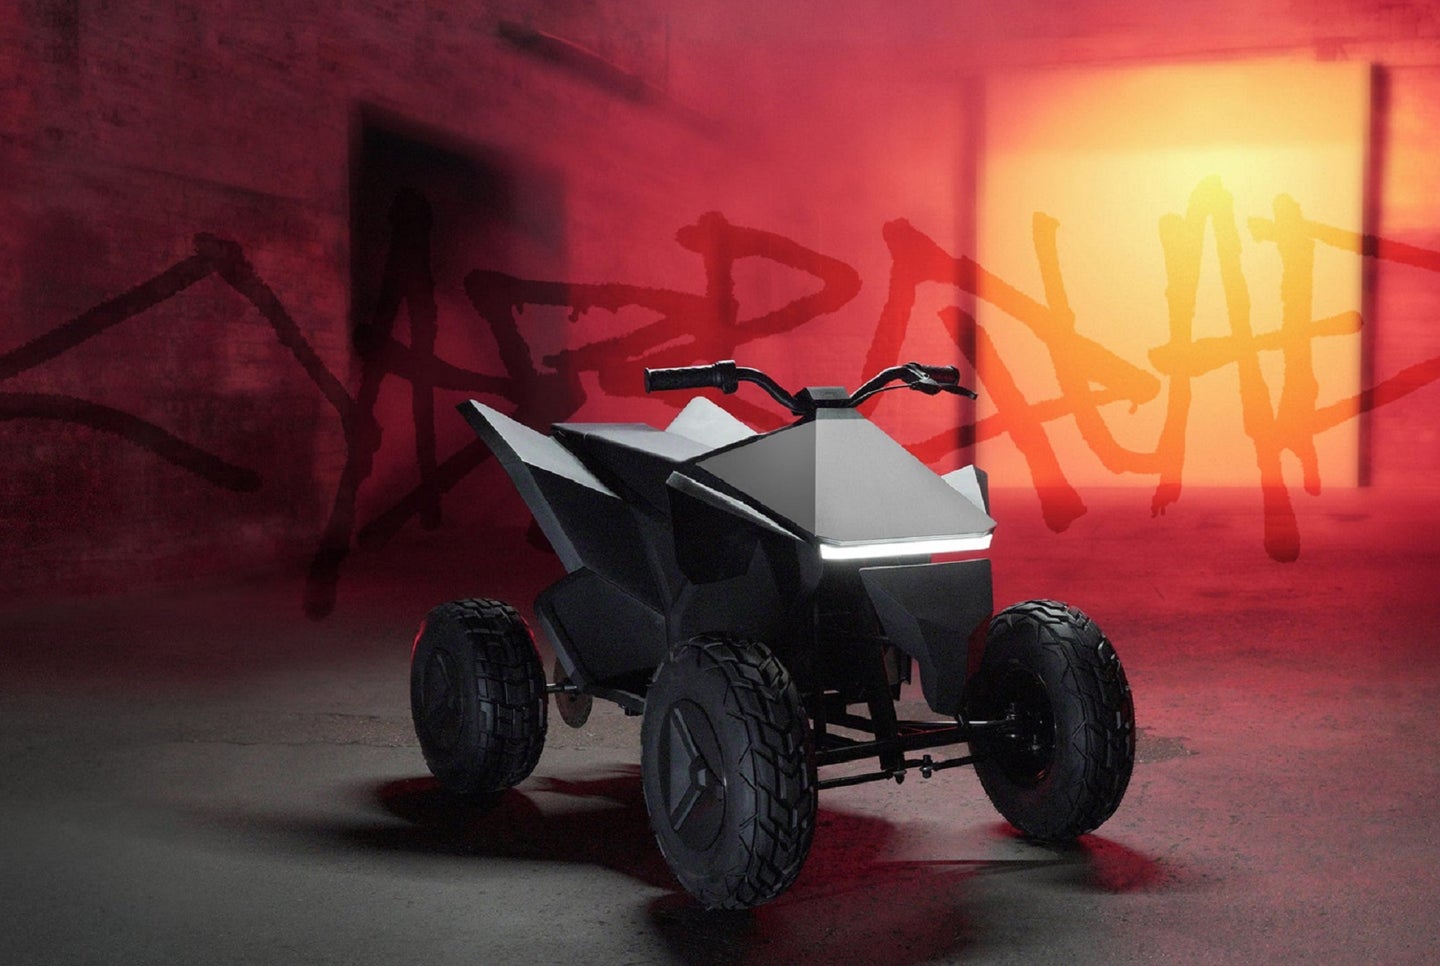 Tesla Cyberquad for Kids made with Radio Flyer on a red graffiti background